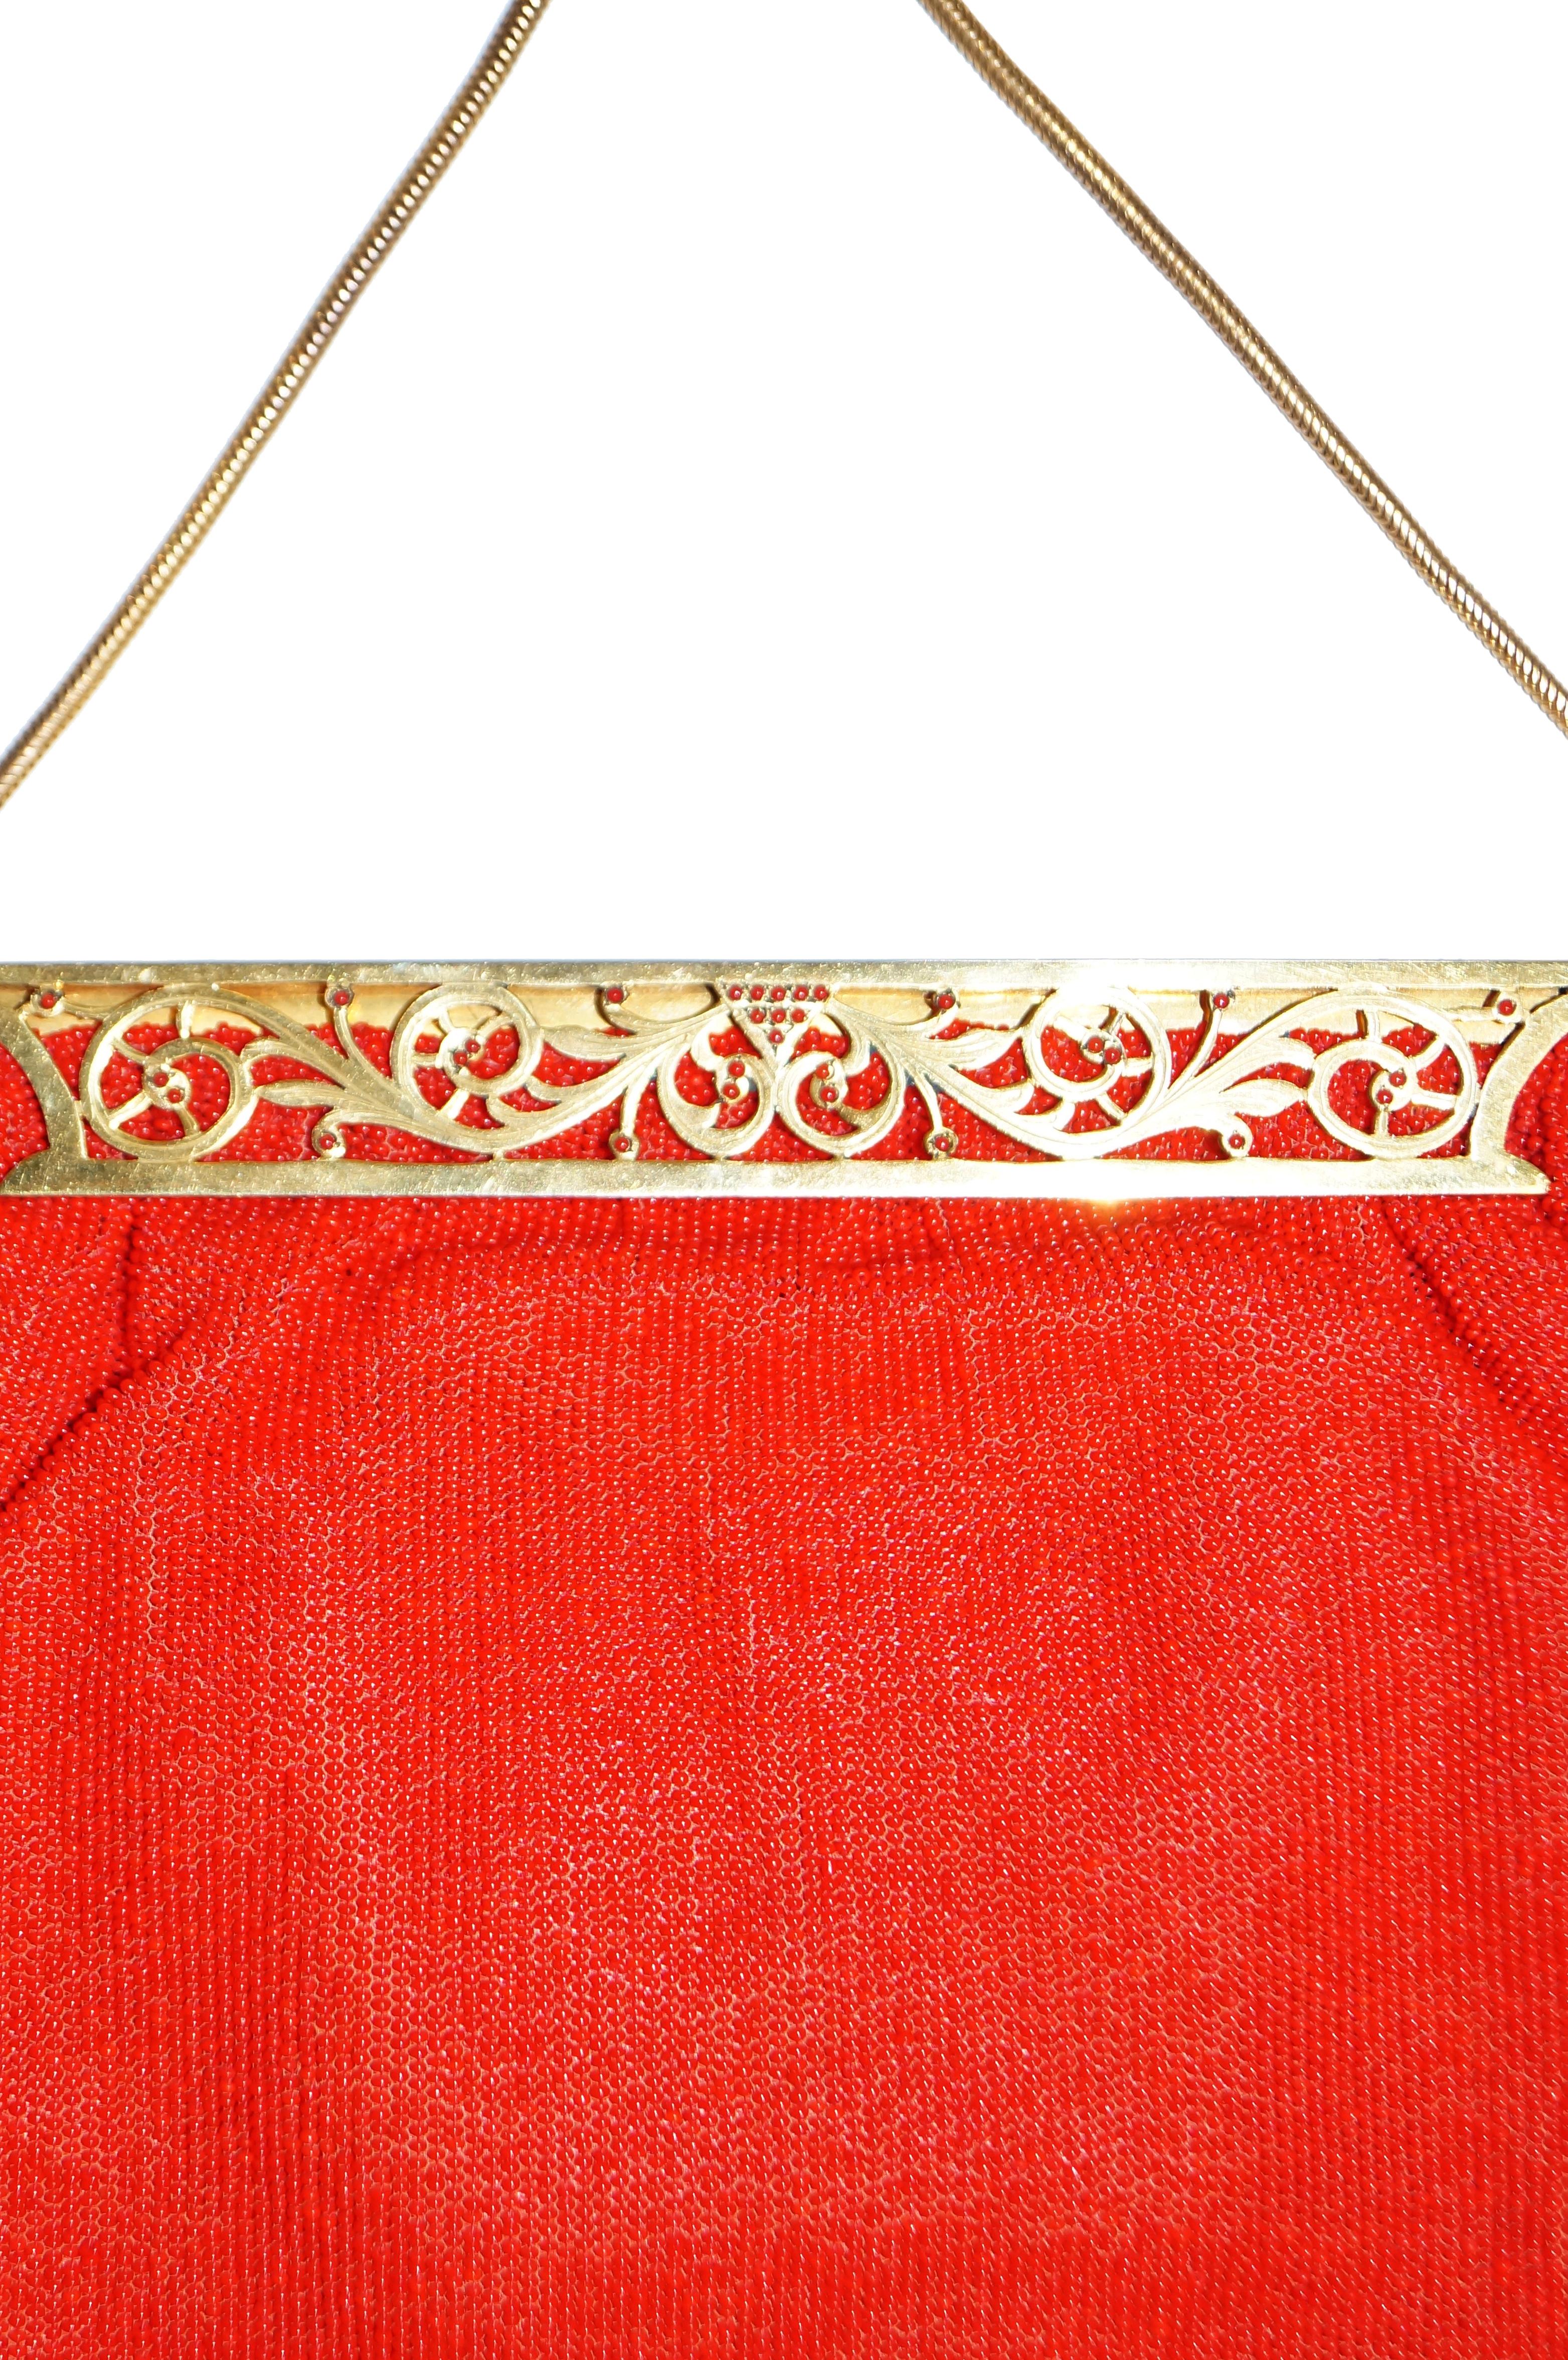 Brilliant red mid century handbag by Eugene Elias Paris. The handbag is shaped like a trapezoid, with a fully beaded, shimmery red exterior, and with a gold - tinged brass frame. The frame features elegant art nouveau - like floral scrollwork. The